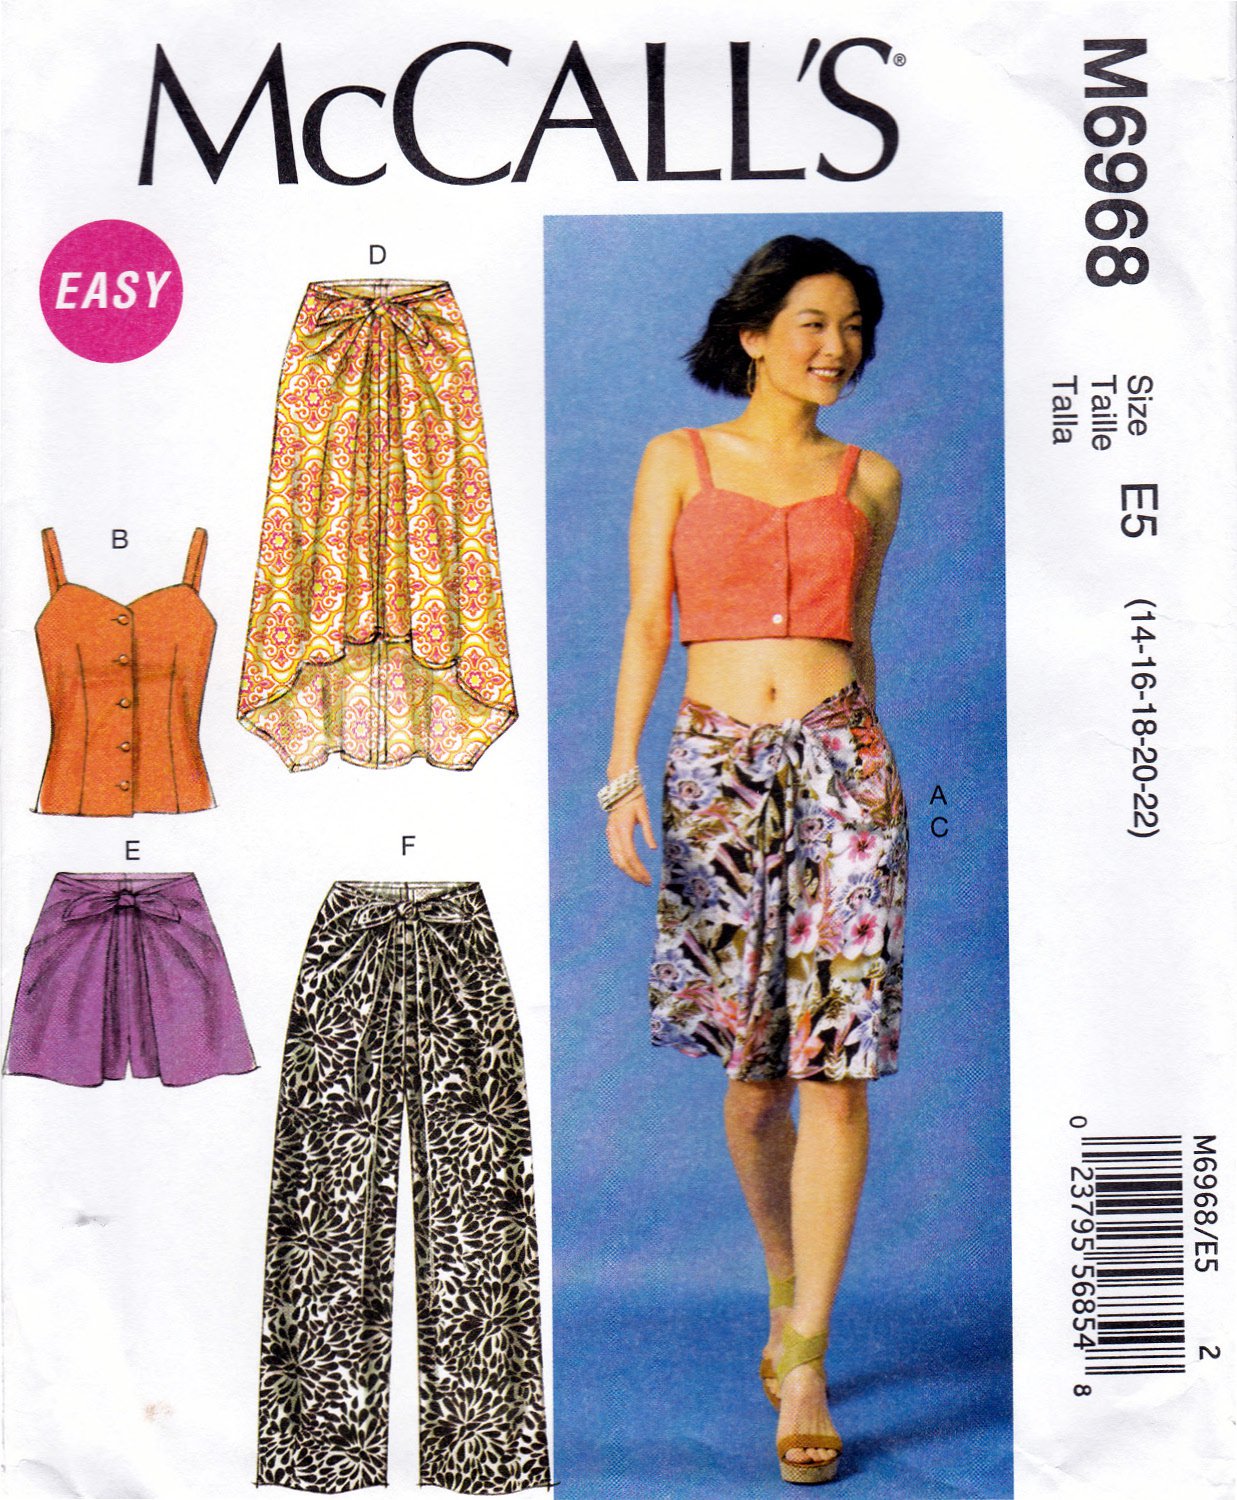 McCall's M6968 6968 Womens Misses Tops Skirts Shorts Pants Sewing Pattern Sizes 14-16-18-20-22